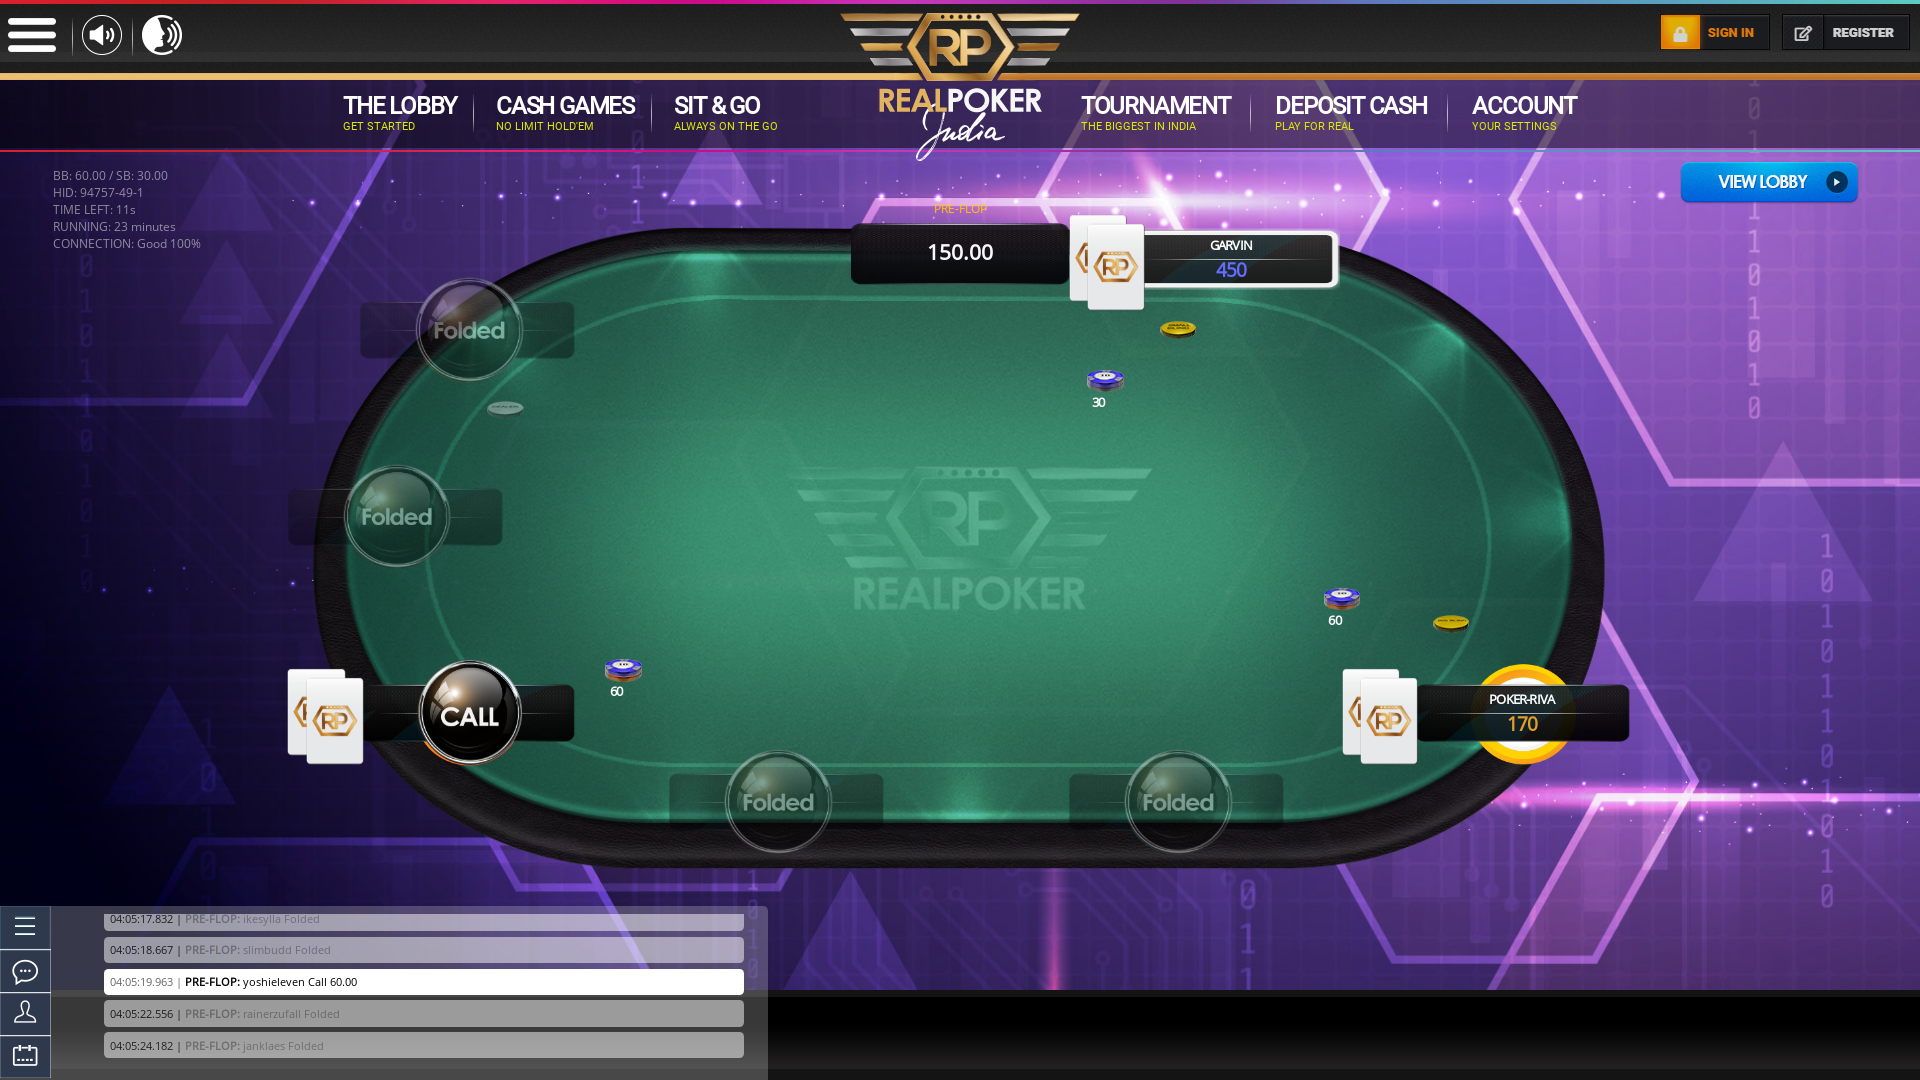 Goa real poker on a 10 player table in the 23rd minute of the match